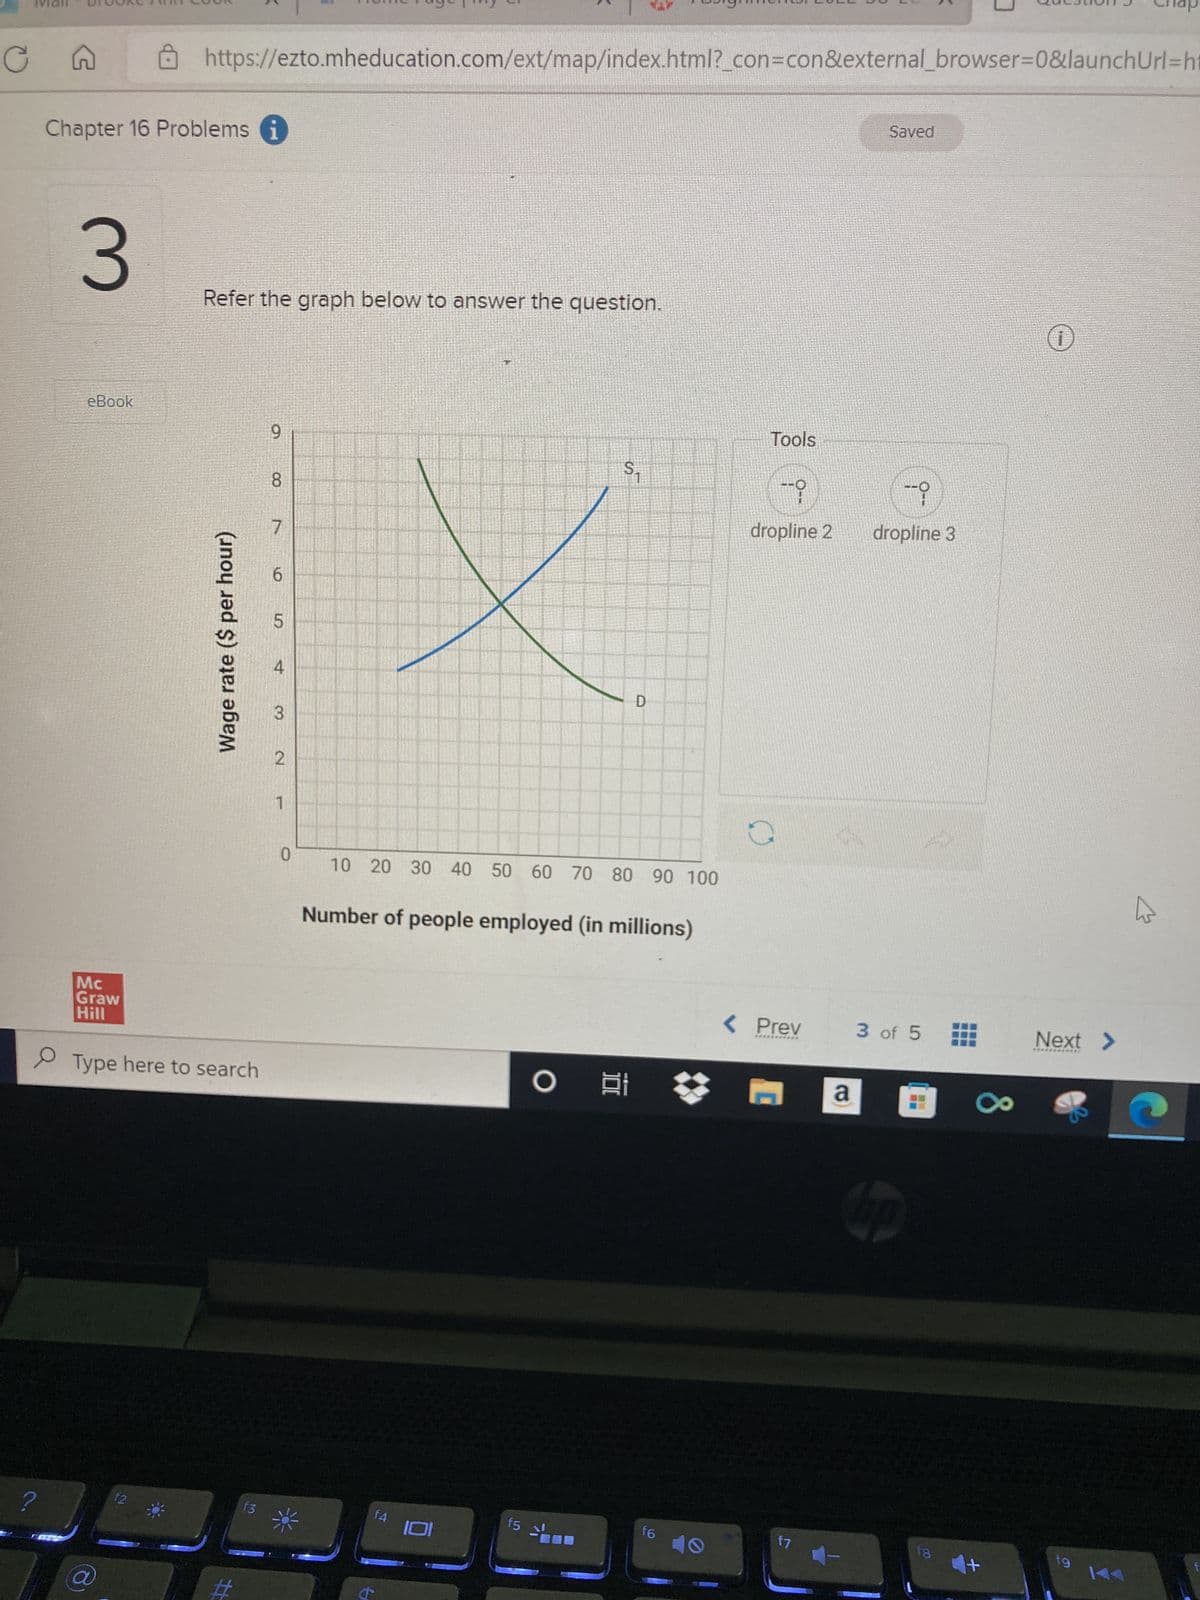 Cn
?
Chapter 16 Problems i
3
eBook
Mc
Graw
Hill
https://ezto.mheducation.com/ext/map/index.html?_con=con&external_browser=0&launch Url=ht
a
12
Refer the graph below to answer the question.
Type here to search
Wage rate ($ per hour)
f3
9
8
7
6
5
3
2
1
0
10 20 30 40 50 60 70 80 90 100
f4
S₁
Number of people employed (in millions)
6
f5
D
O i
f6
Tools
i
dropline 2
< Prev
**********
f7
Saved
-i
dropline 3
3 of 5
hp
18
x
+
1
Next >
**********er
fg
hs